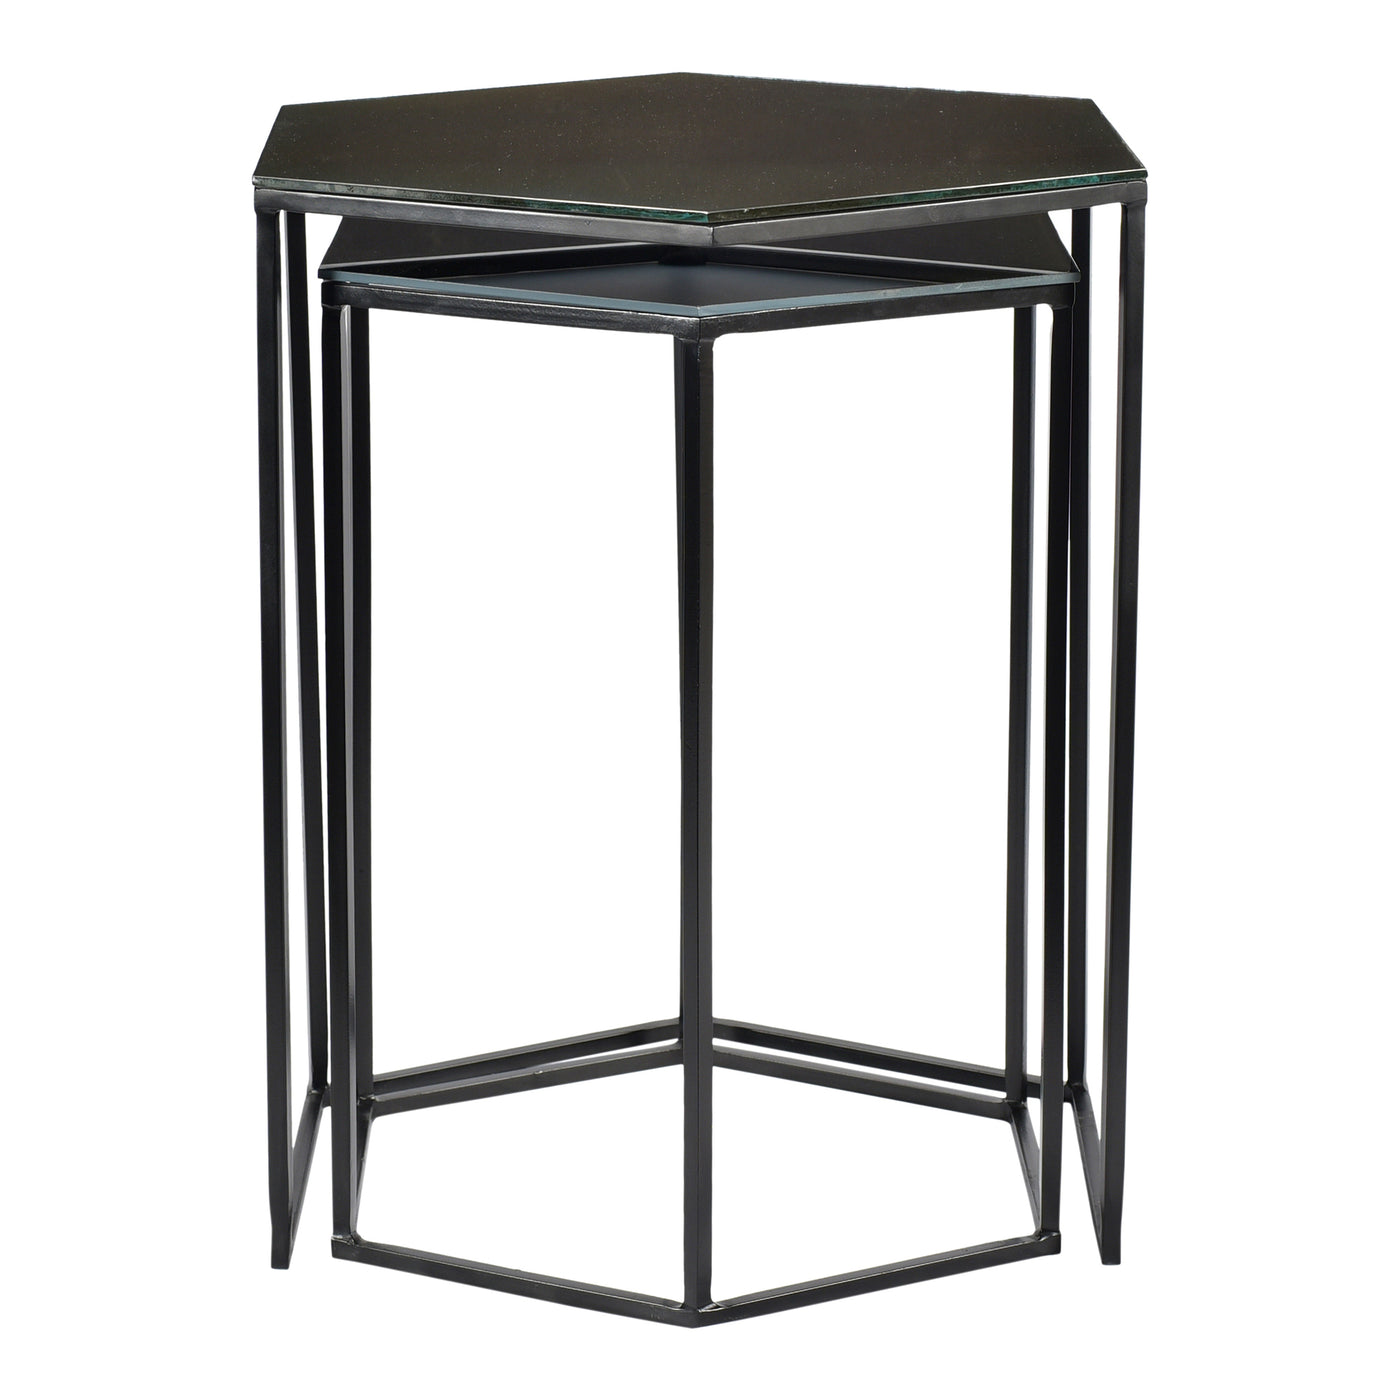 The Polygon Accent Tables are the ideal space-saving solution. With glass tabletops and an iron base, these tables are the...